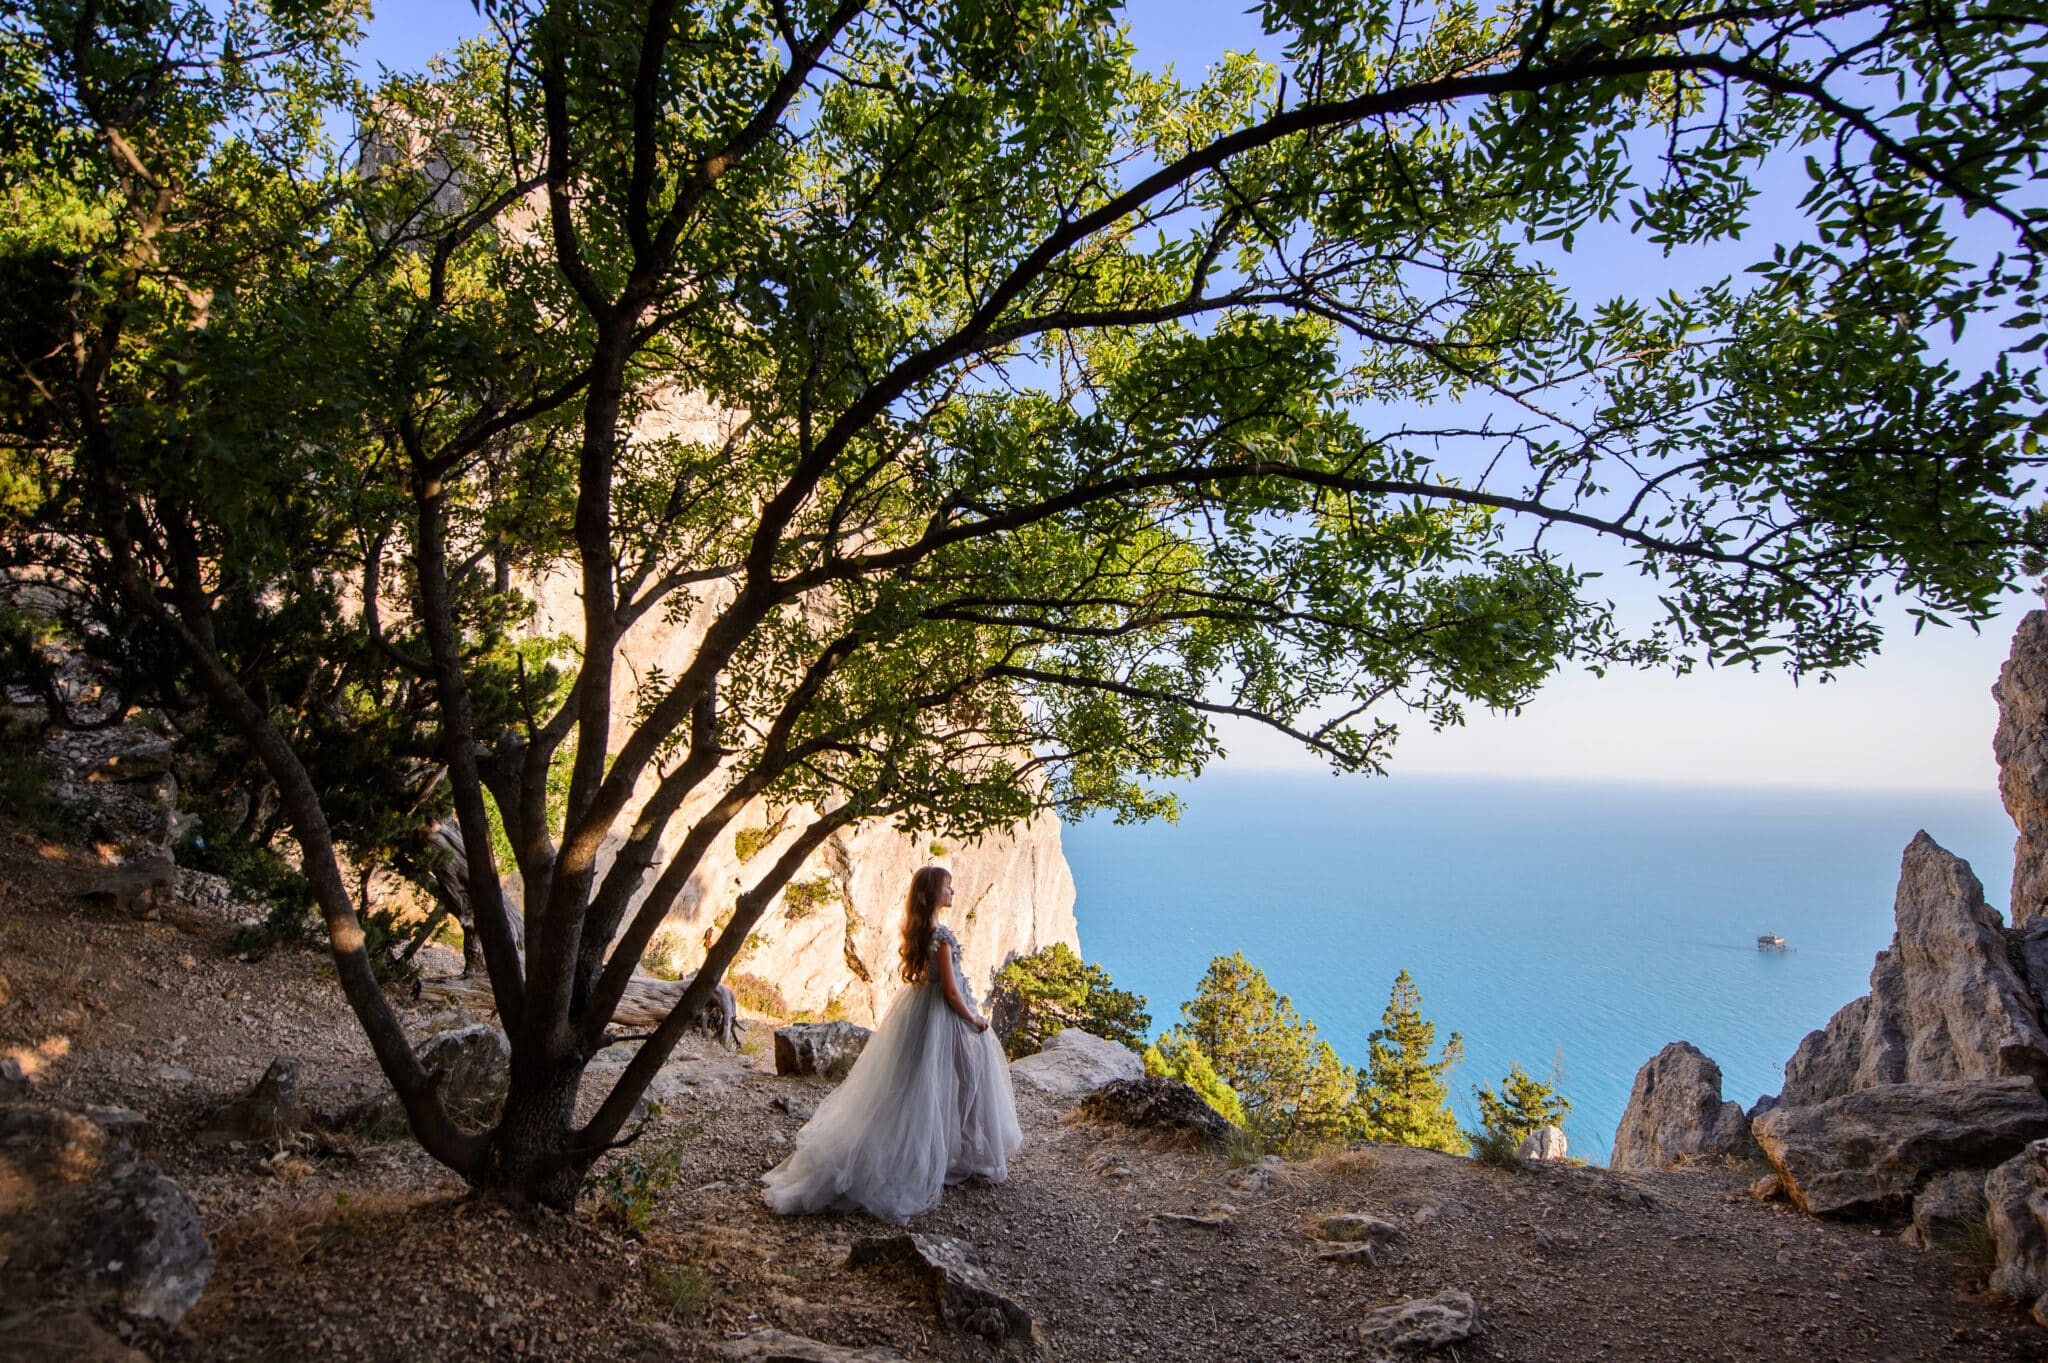 Beautiful young lady in white dress on a cliff with trees and view of the calm ocean